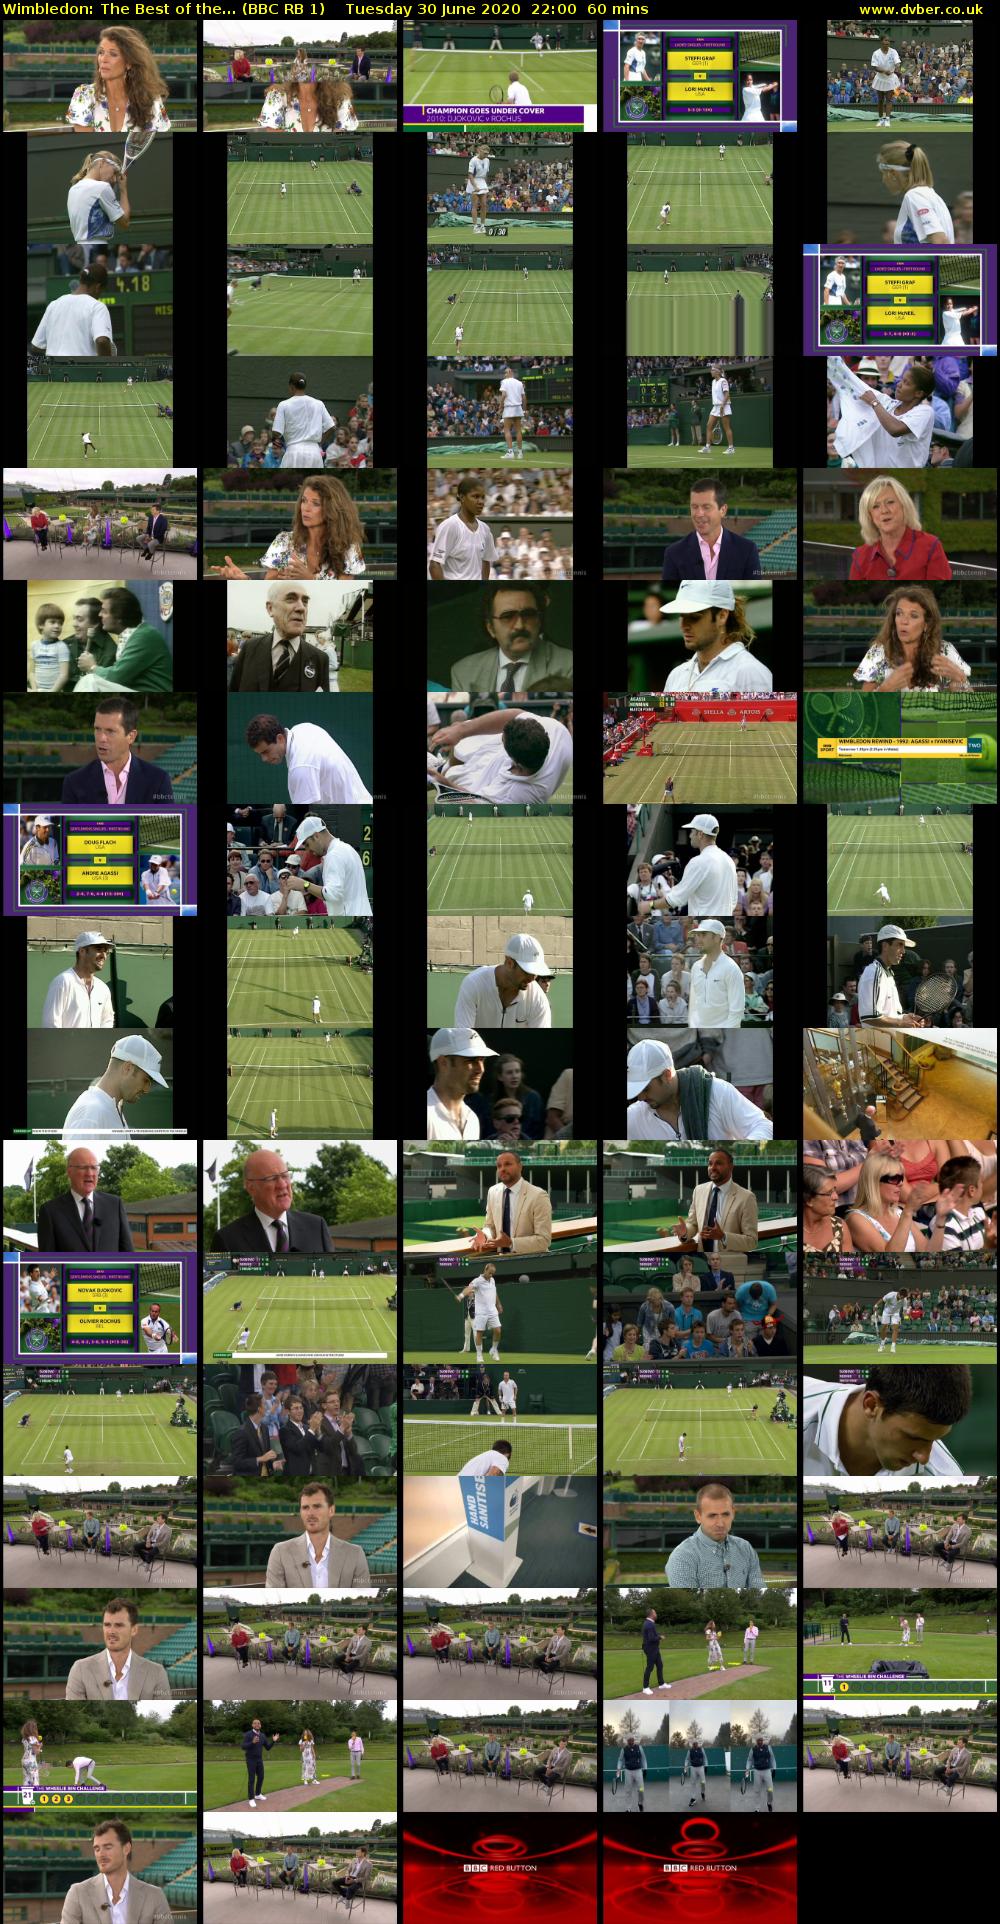 Wimbledon: The Best of the... (BBC RB 1) Tuesday 30 June 2020 22:00 - 23:00